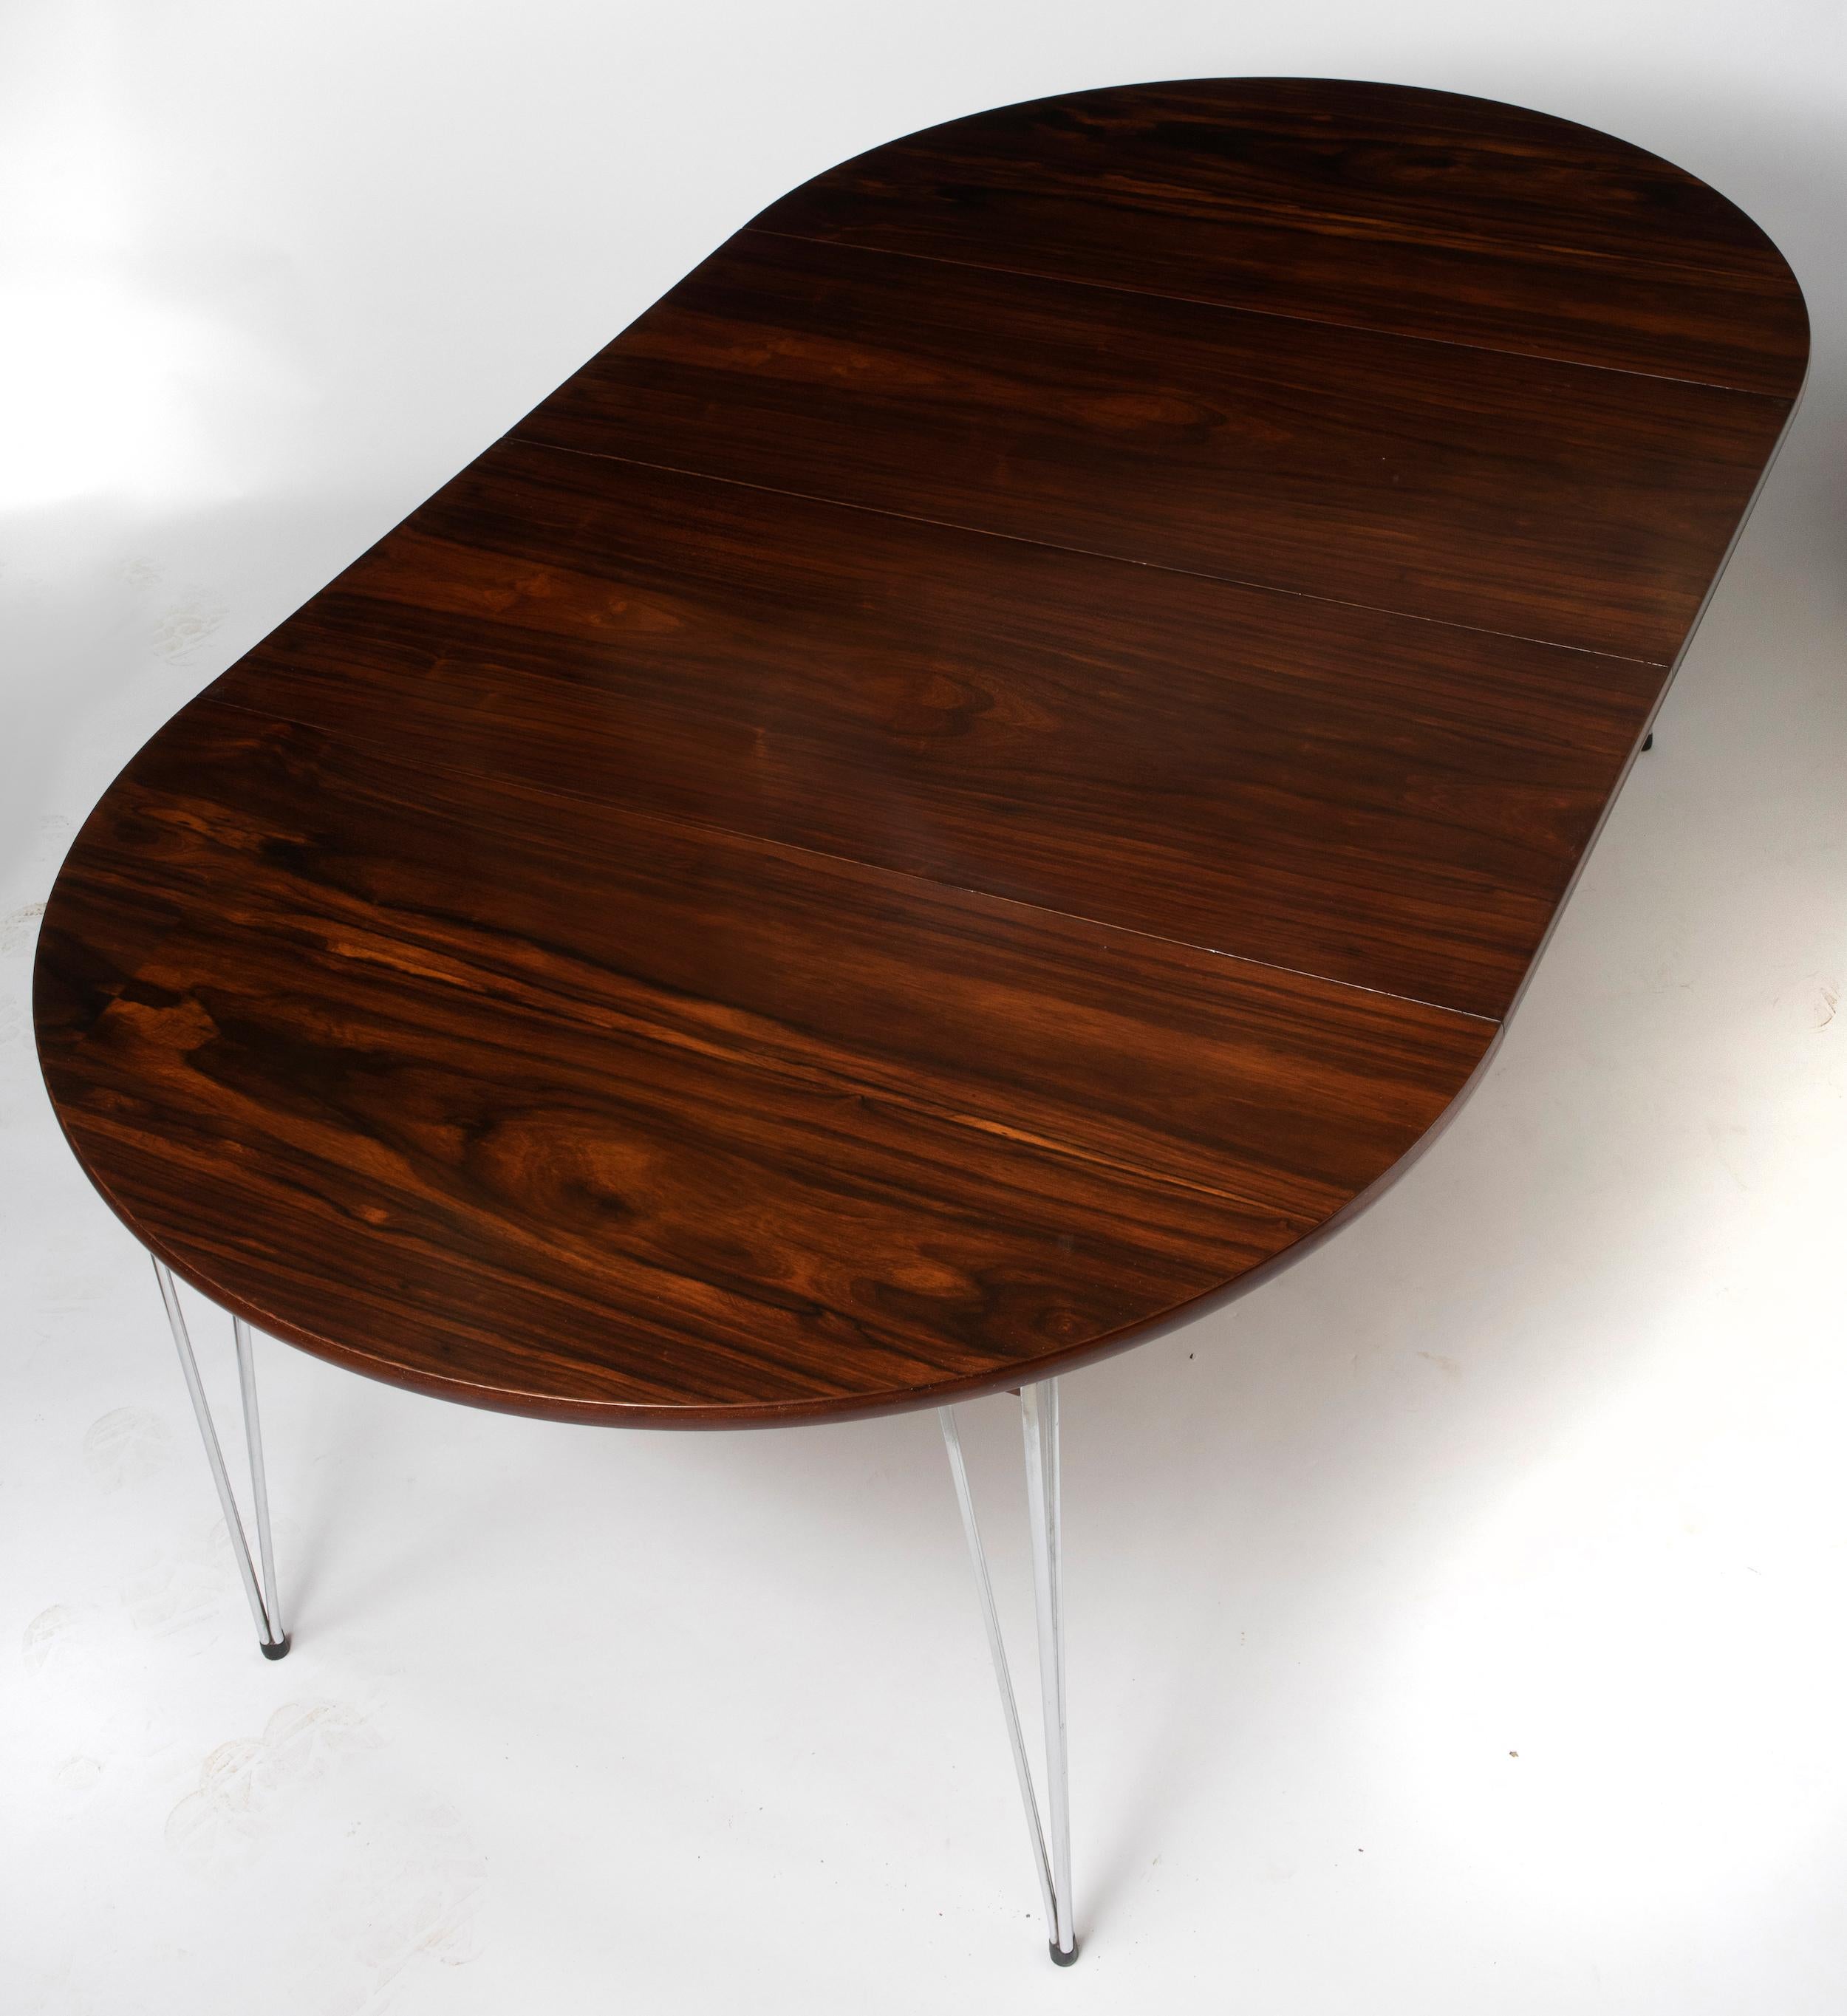 A Scandinavian rosewood dining table by Hans Brattrud.
The extending top with a hidden two part leaf. Upon a chromium plated base.
Ebonized stretcher.
Unmarked.
Norway circa 1957
Measures: 73 cm high x 137 cm wide (198 cm extended) x 92 cm deep.
 